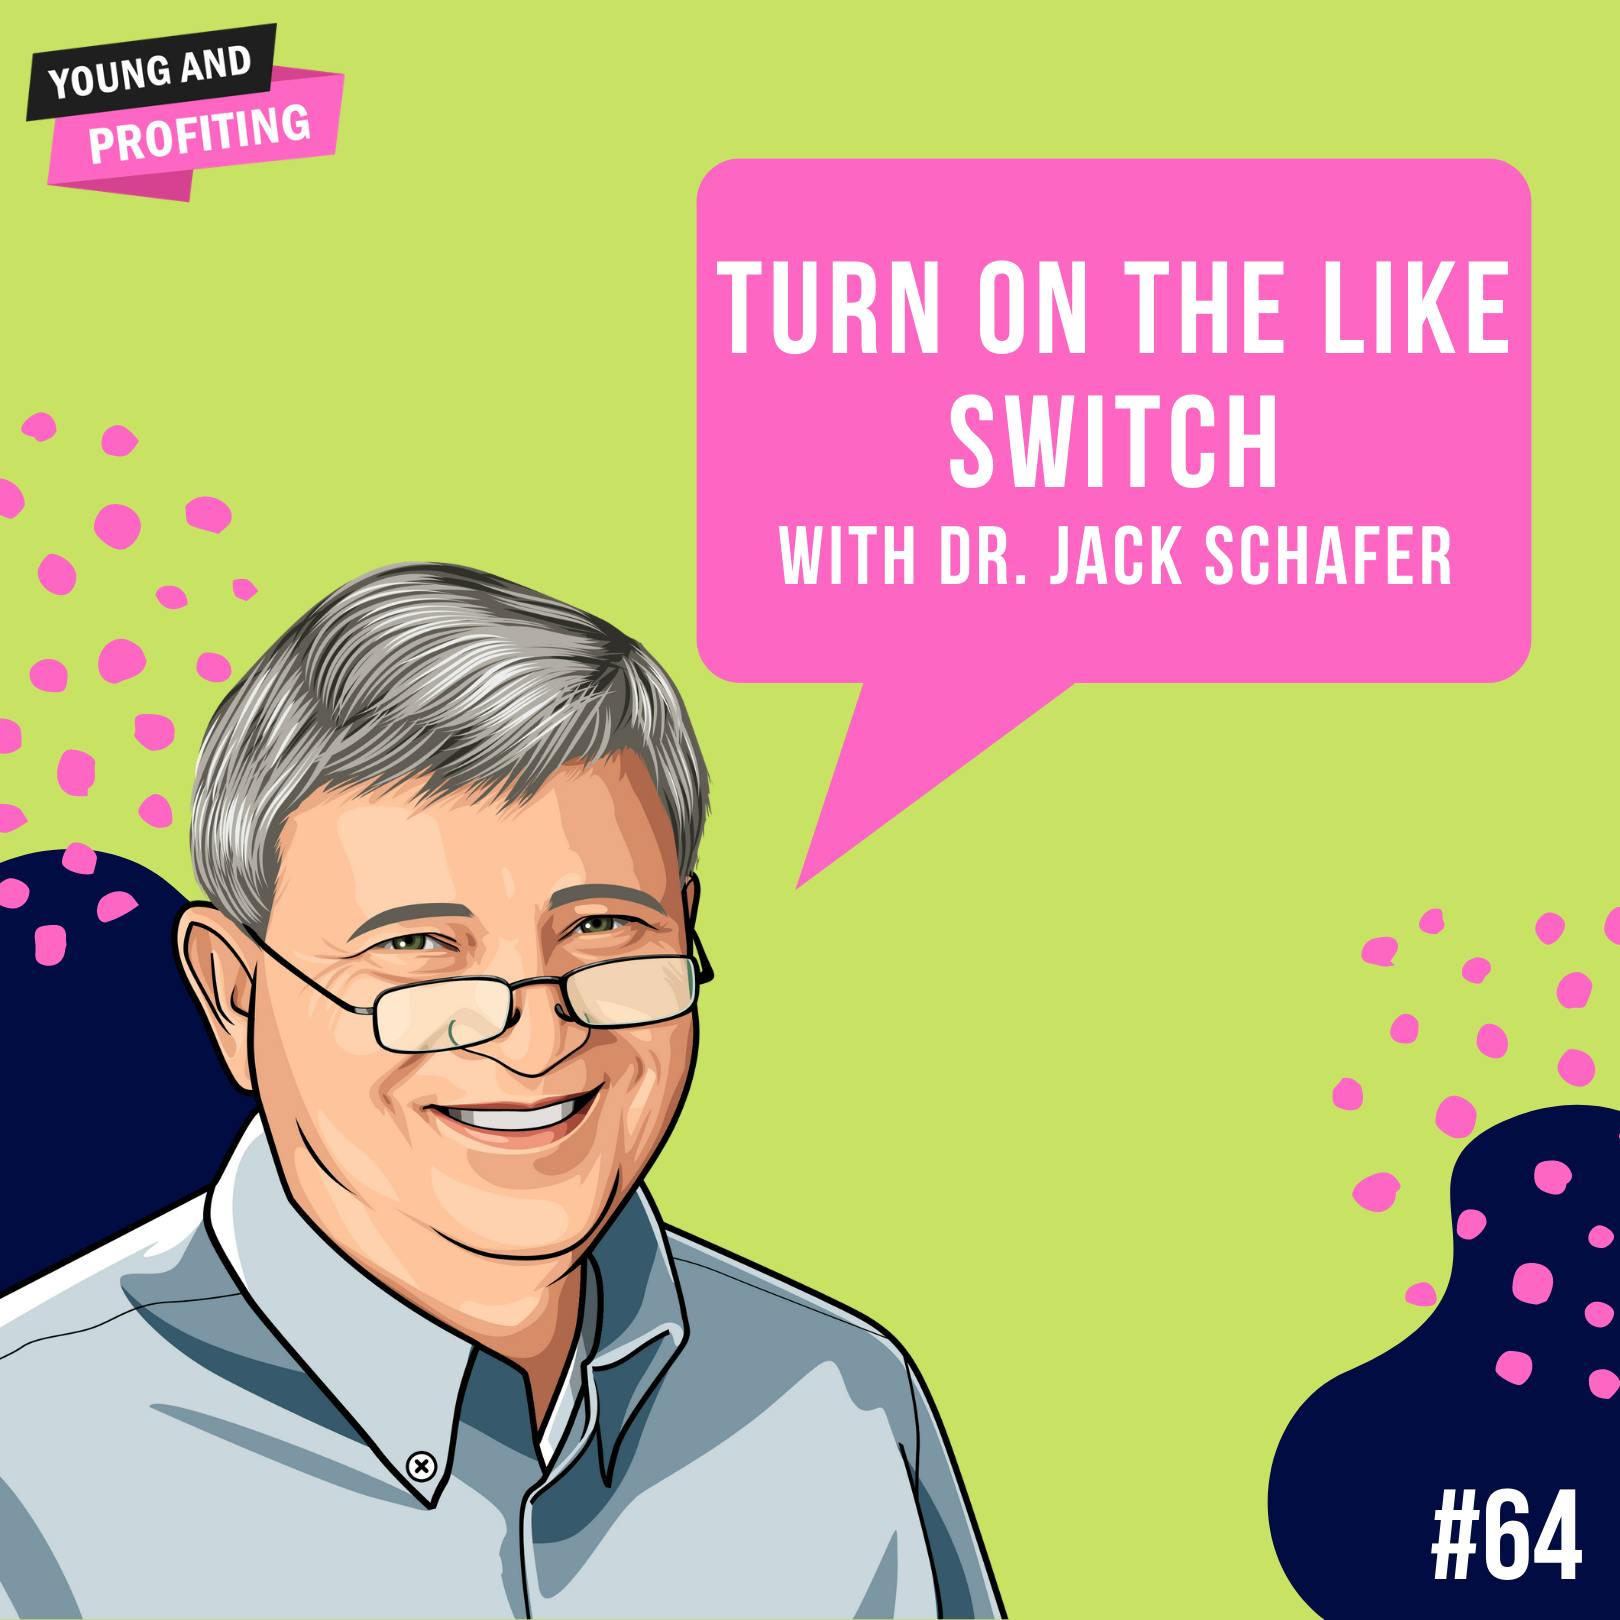 Dr. Jack Schafer: Turn On The Like Switch | E64 by Hala Taha | YAP Media Network